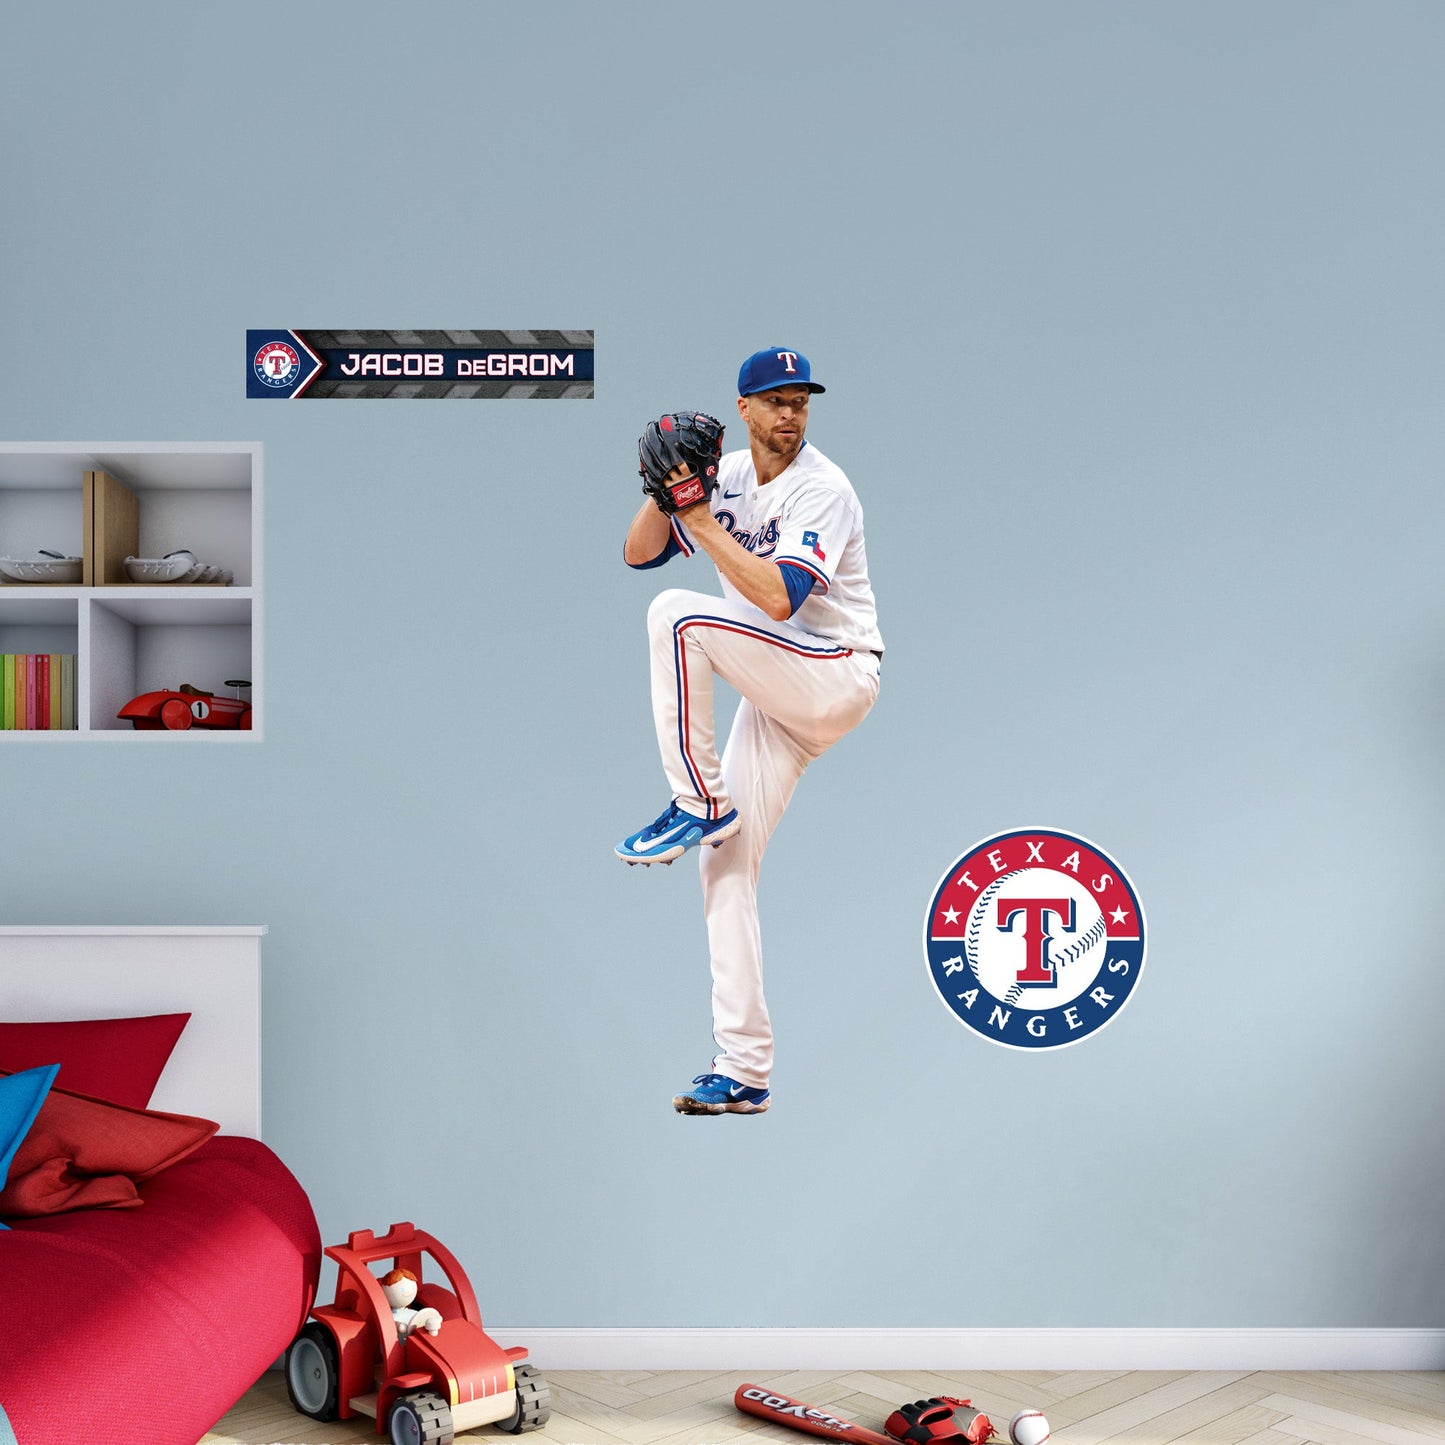 Texas Rangers: Jacob deGrom - Officially Licensed MLB Removable Adhesive Decal